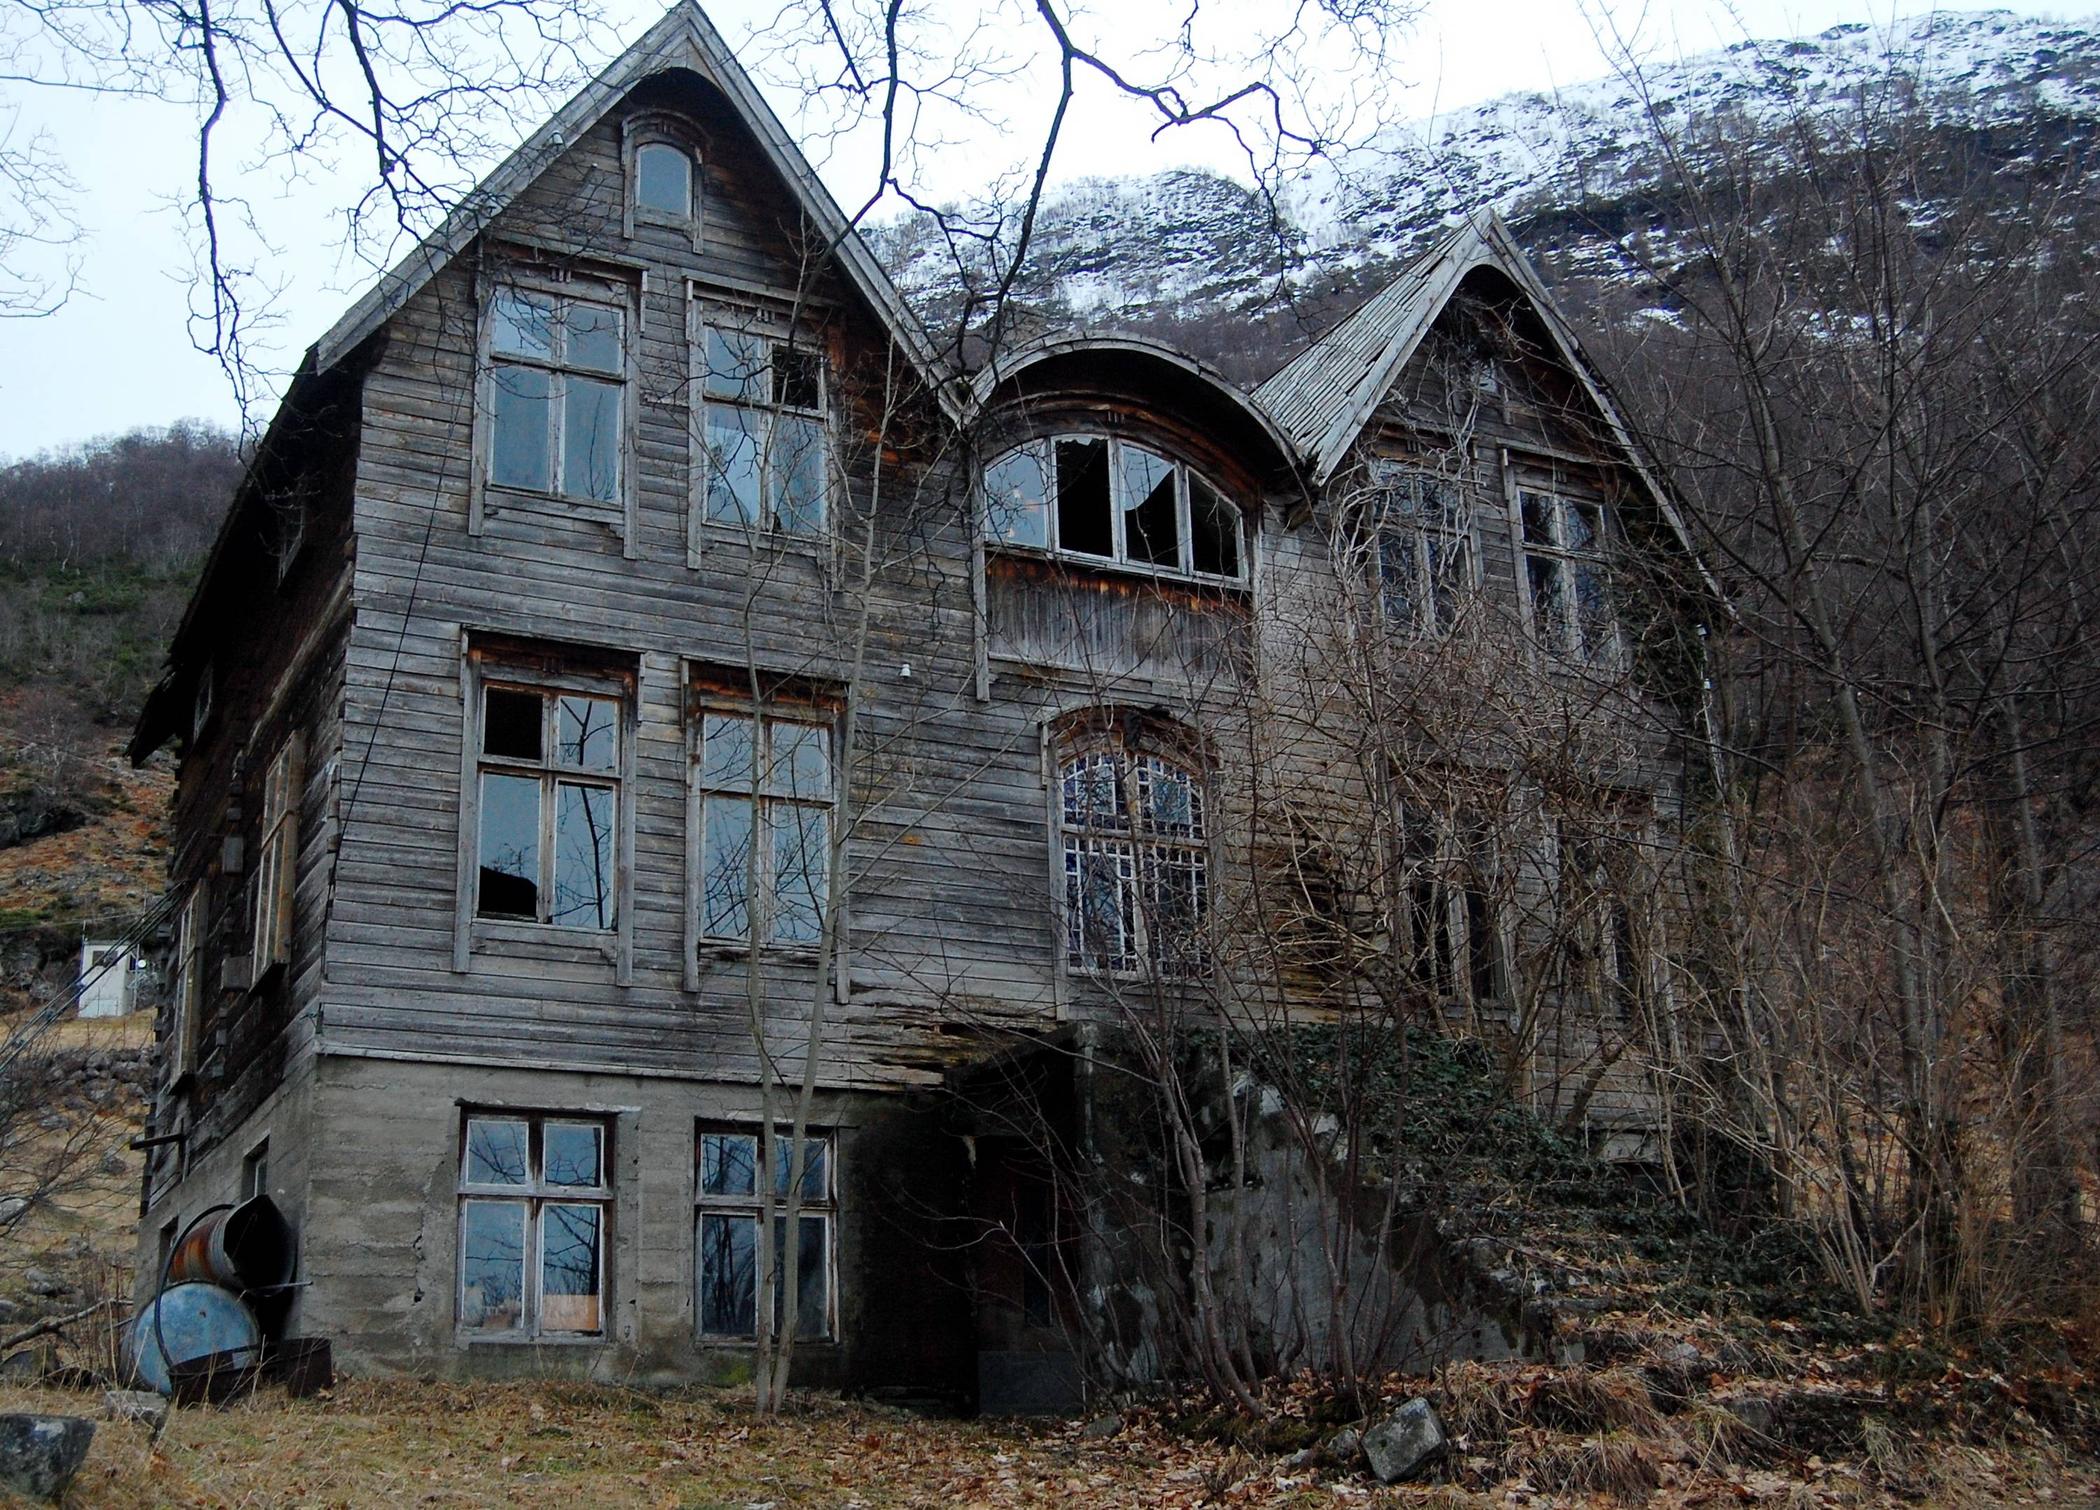 Abandoned house in the mountains.